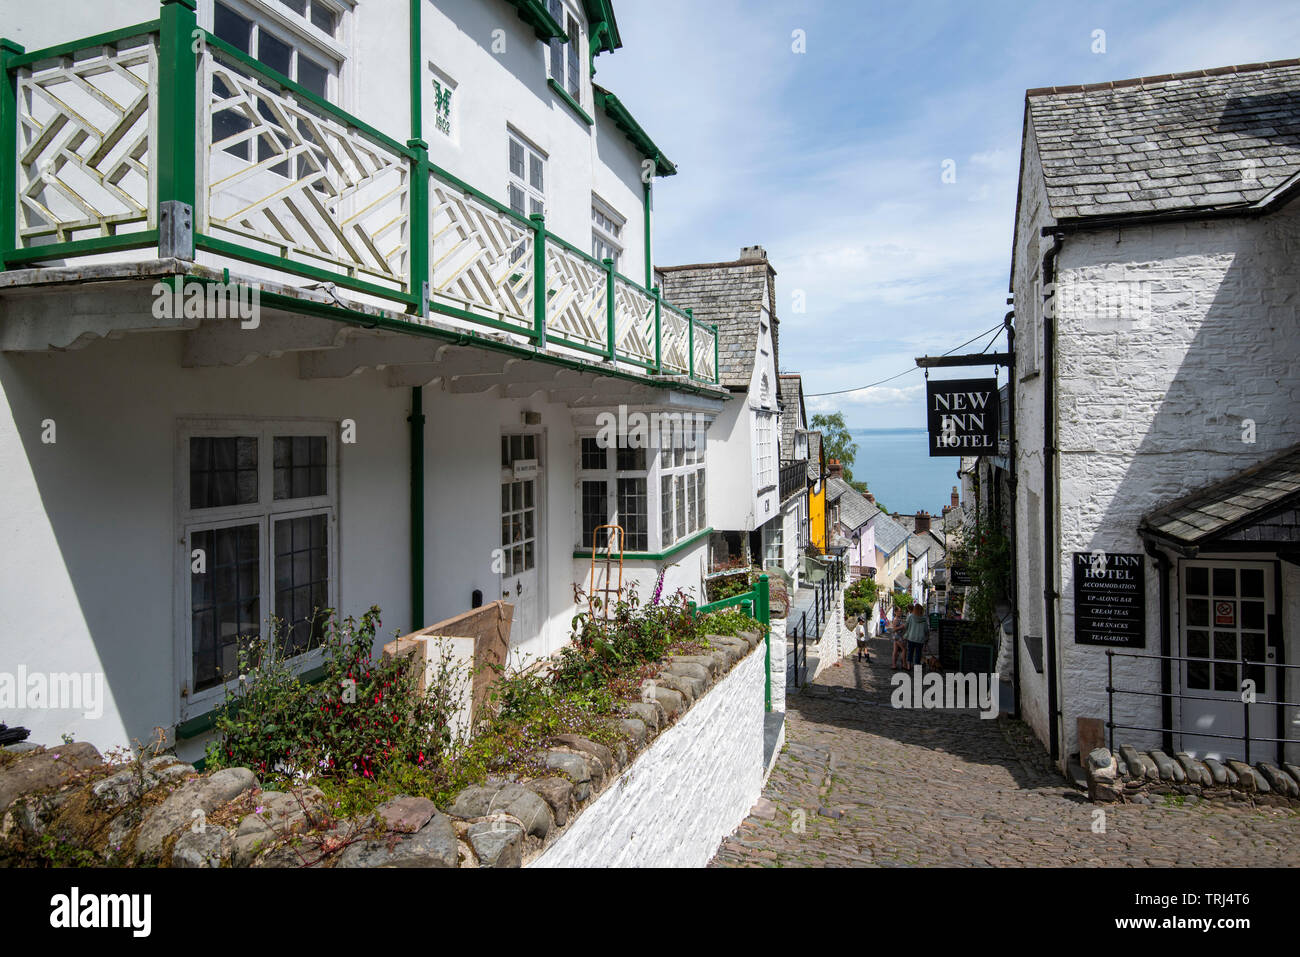 A sunny spring day on the cobbled streets of Clovelly, Devon England UK Stock Photo